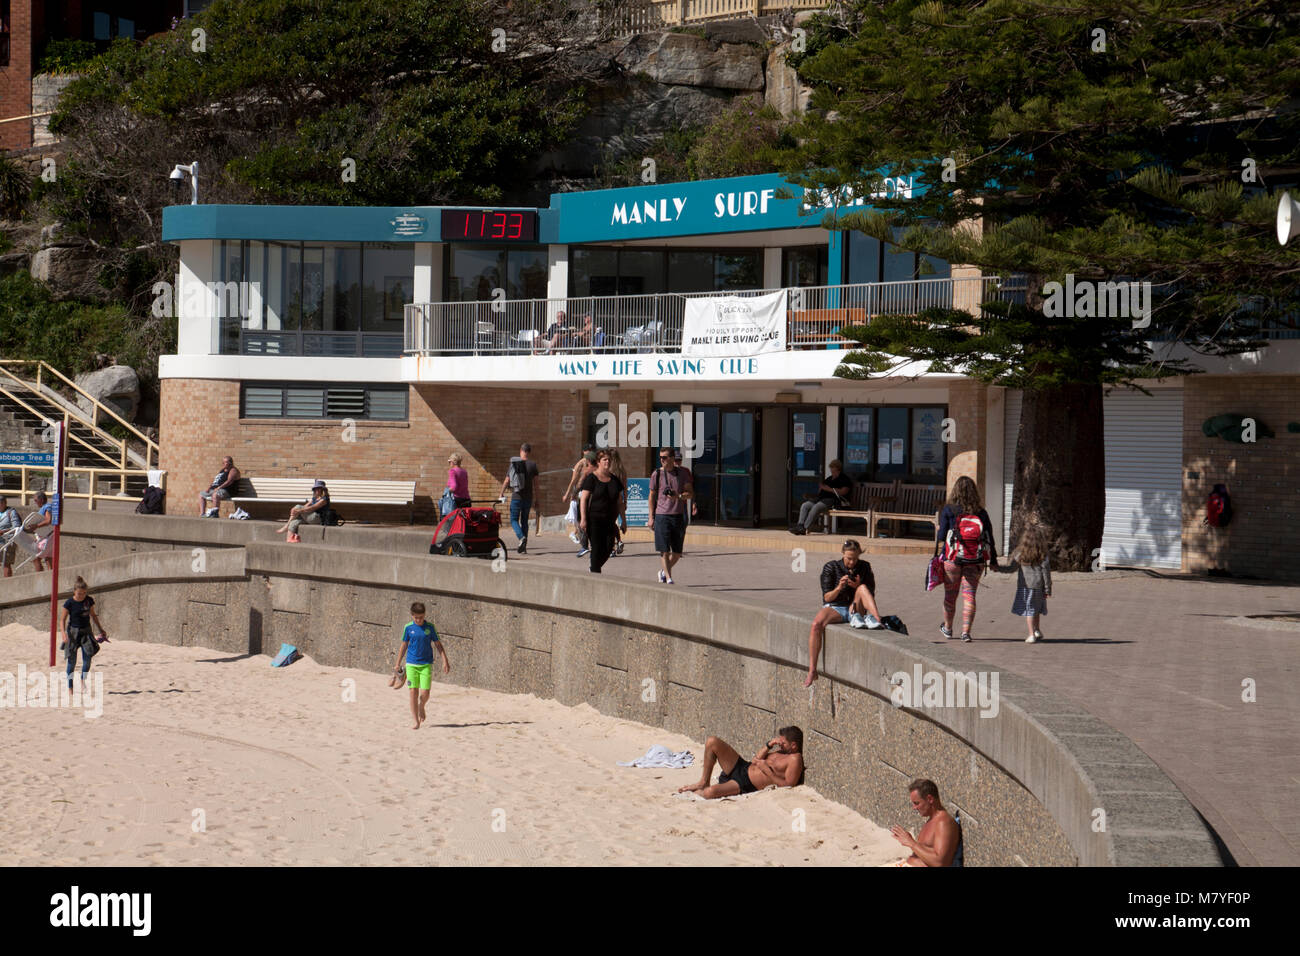 manly surf pavilion manly beach manly sydney new south wales australia Stock Photo